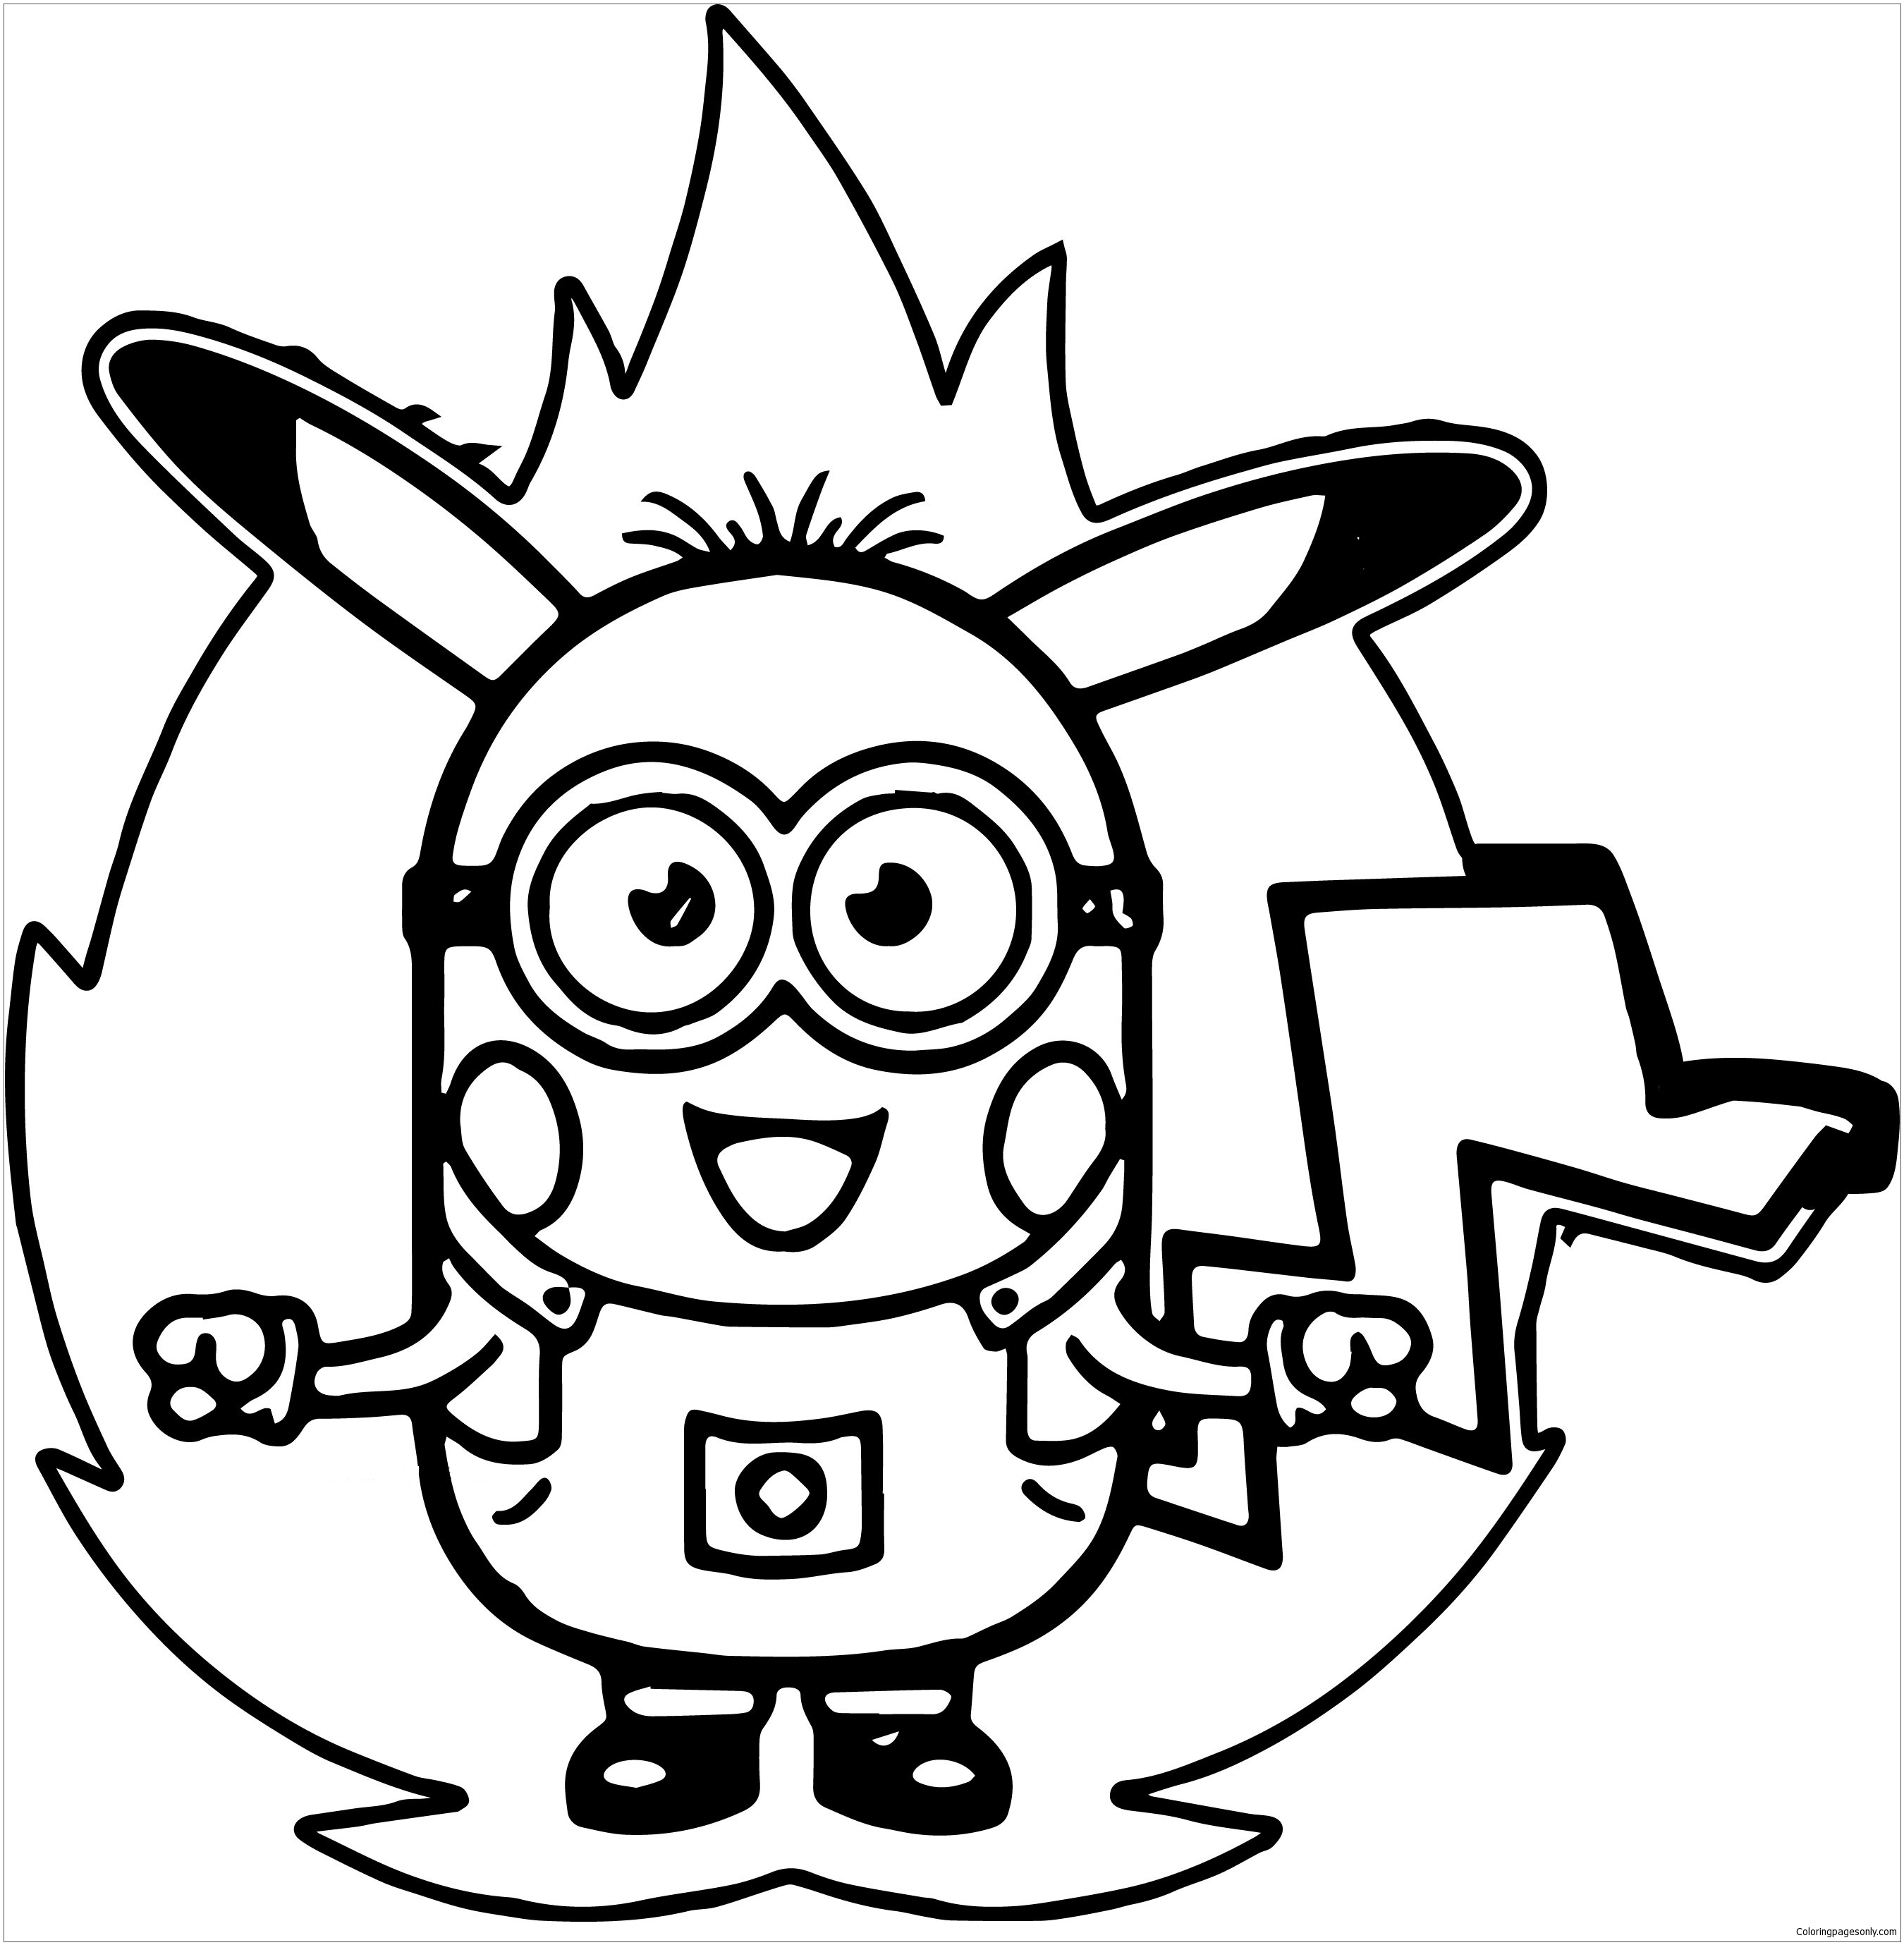 Minion Pokemon Coloring Page   Free Coloring Pages Online